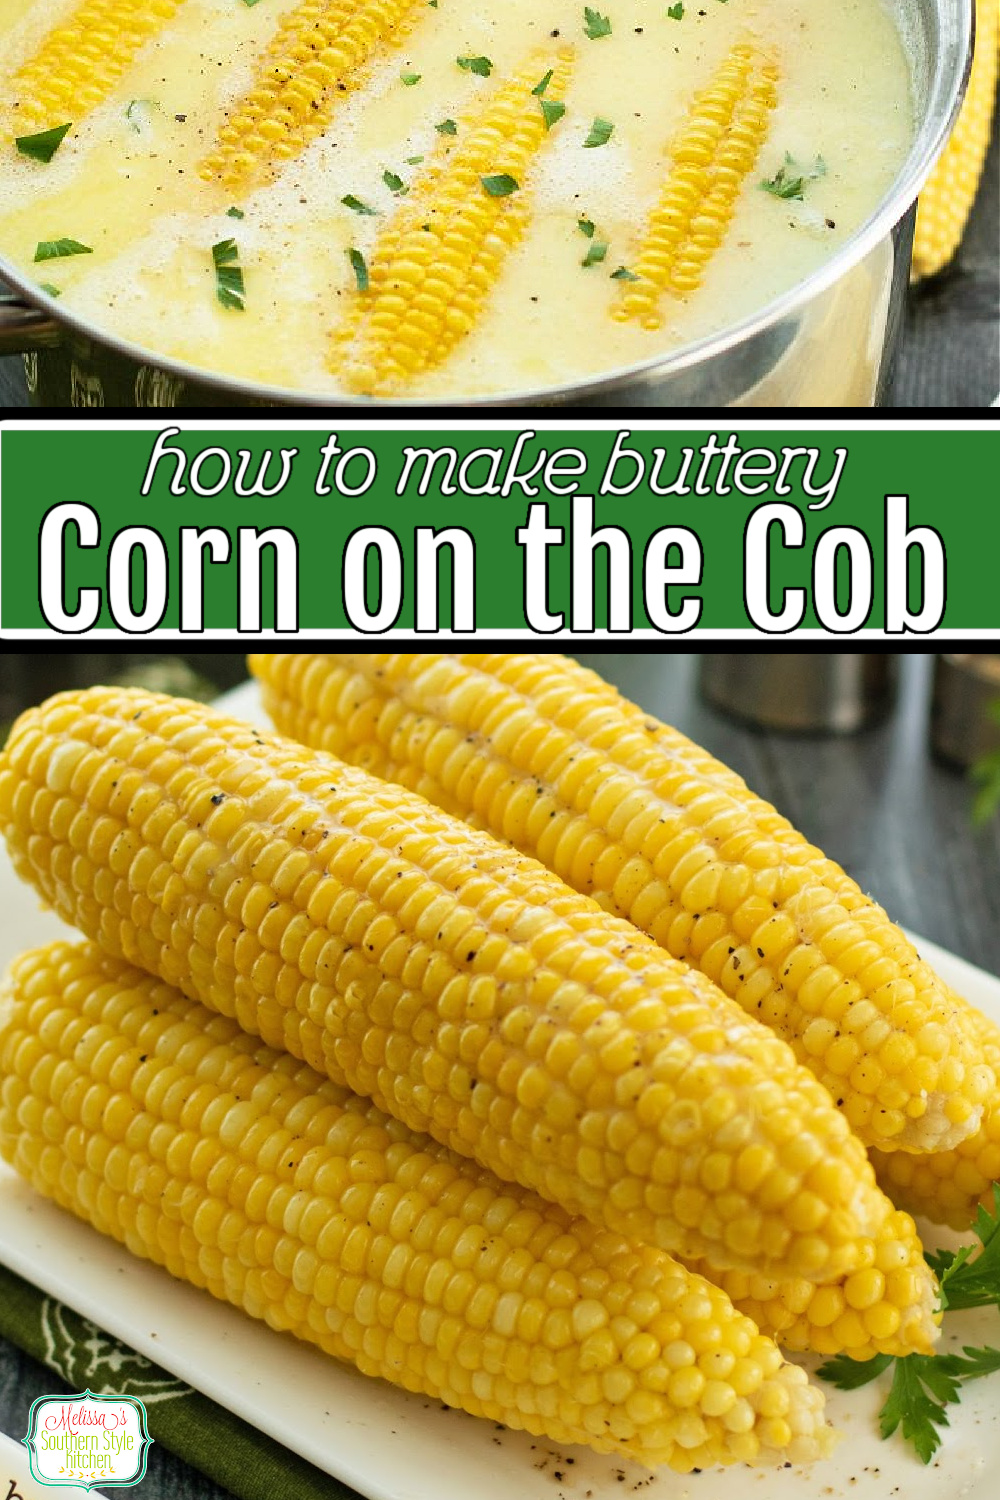 This simple recipe for How to Boil Corn on the Cob results in sweet perfectly cooked corn every time #cornonthecob #howtomakecorn #easycornonthecobrecipe #cornrecipes #boilingcorn via @melissasssk